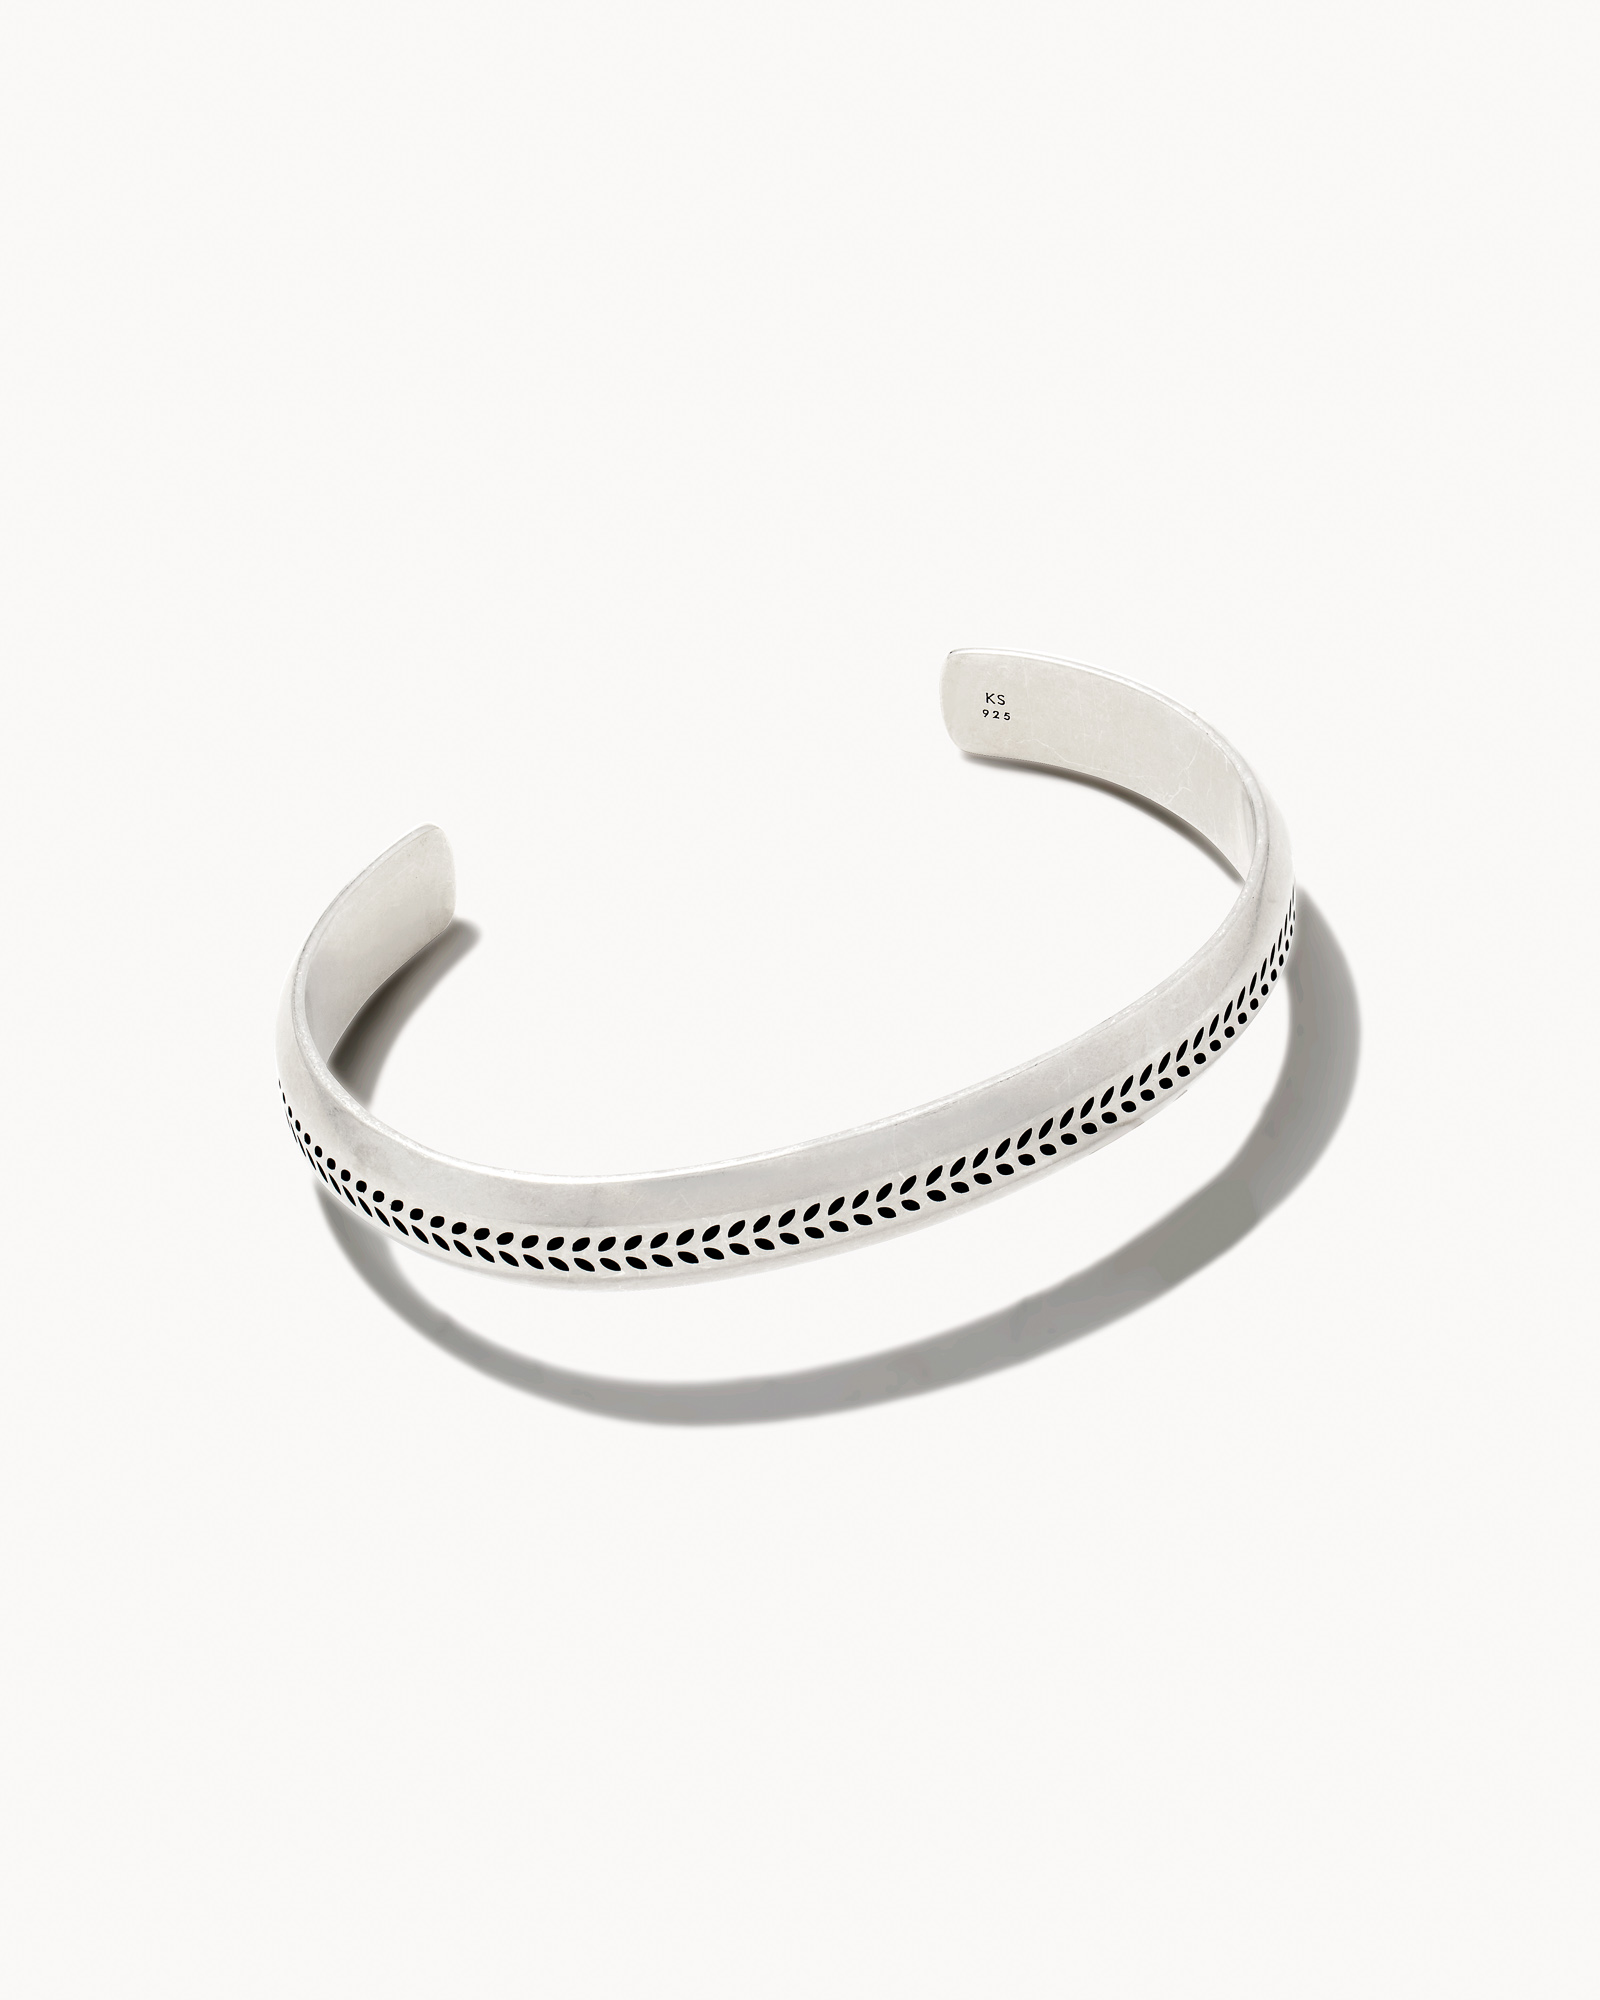 Hicks Thin Cuff Bracelet in Oxidized Sterling Silver